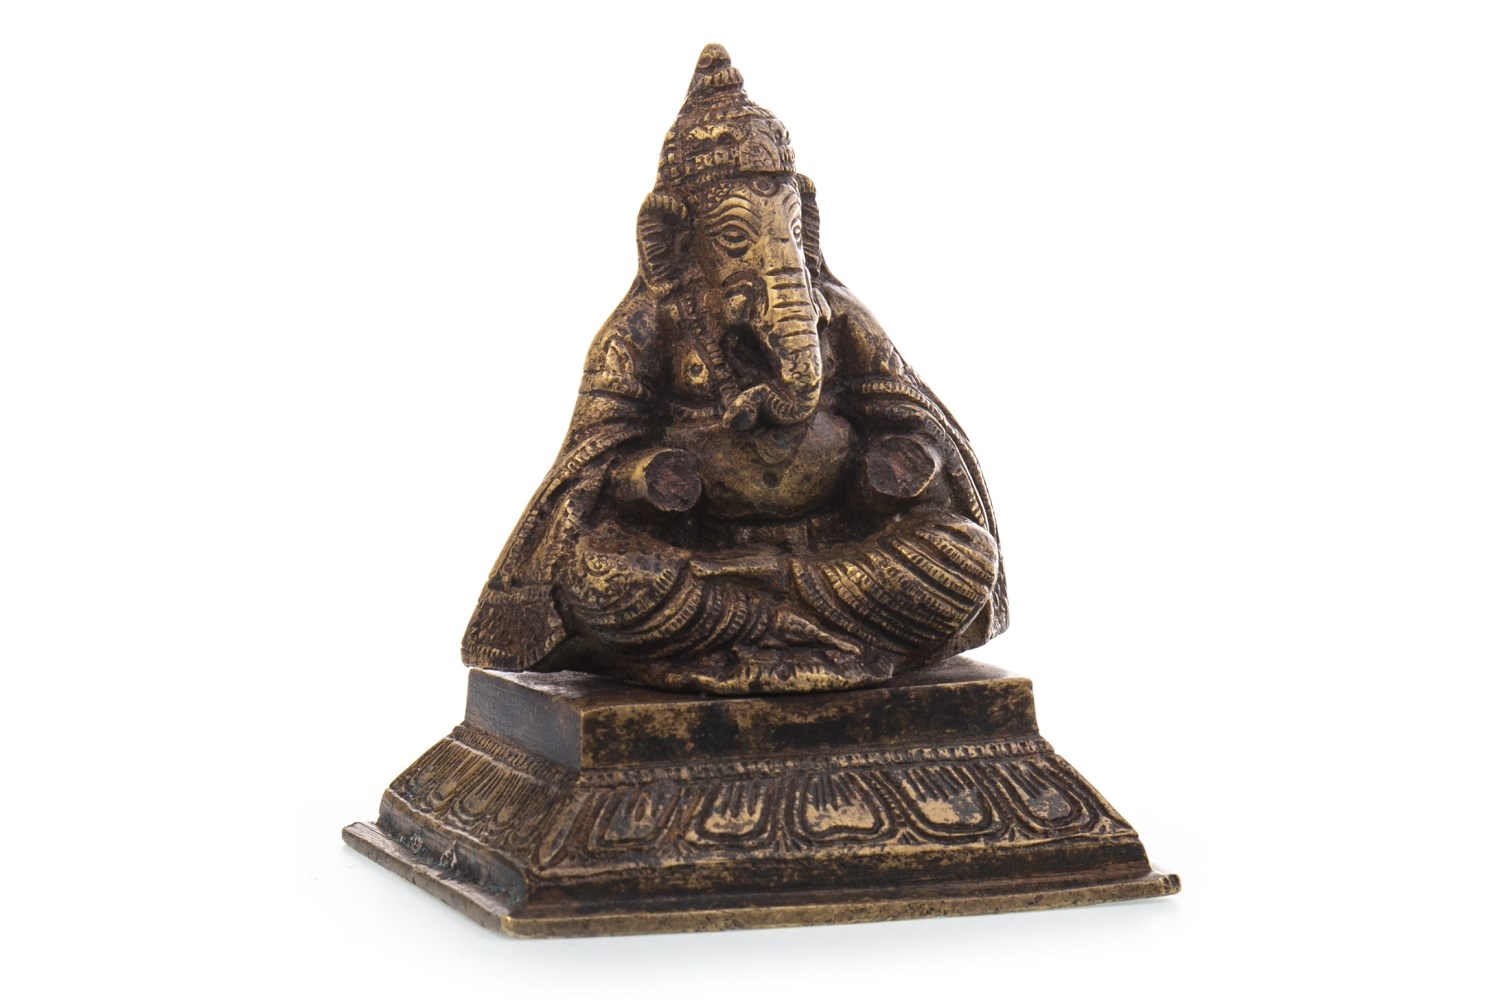 AN INDIAN GILDED METAL FIGURE OF GANESH